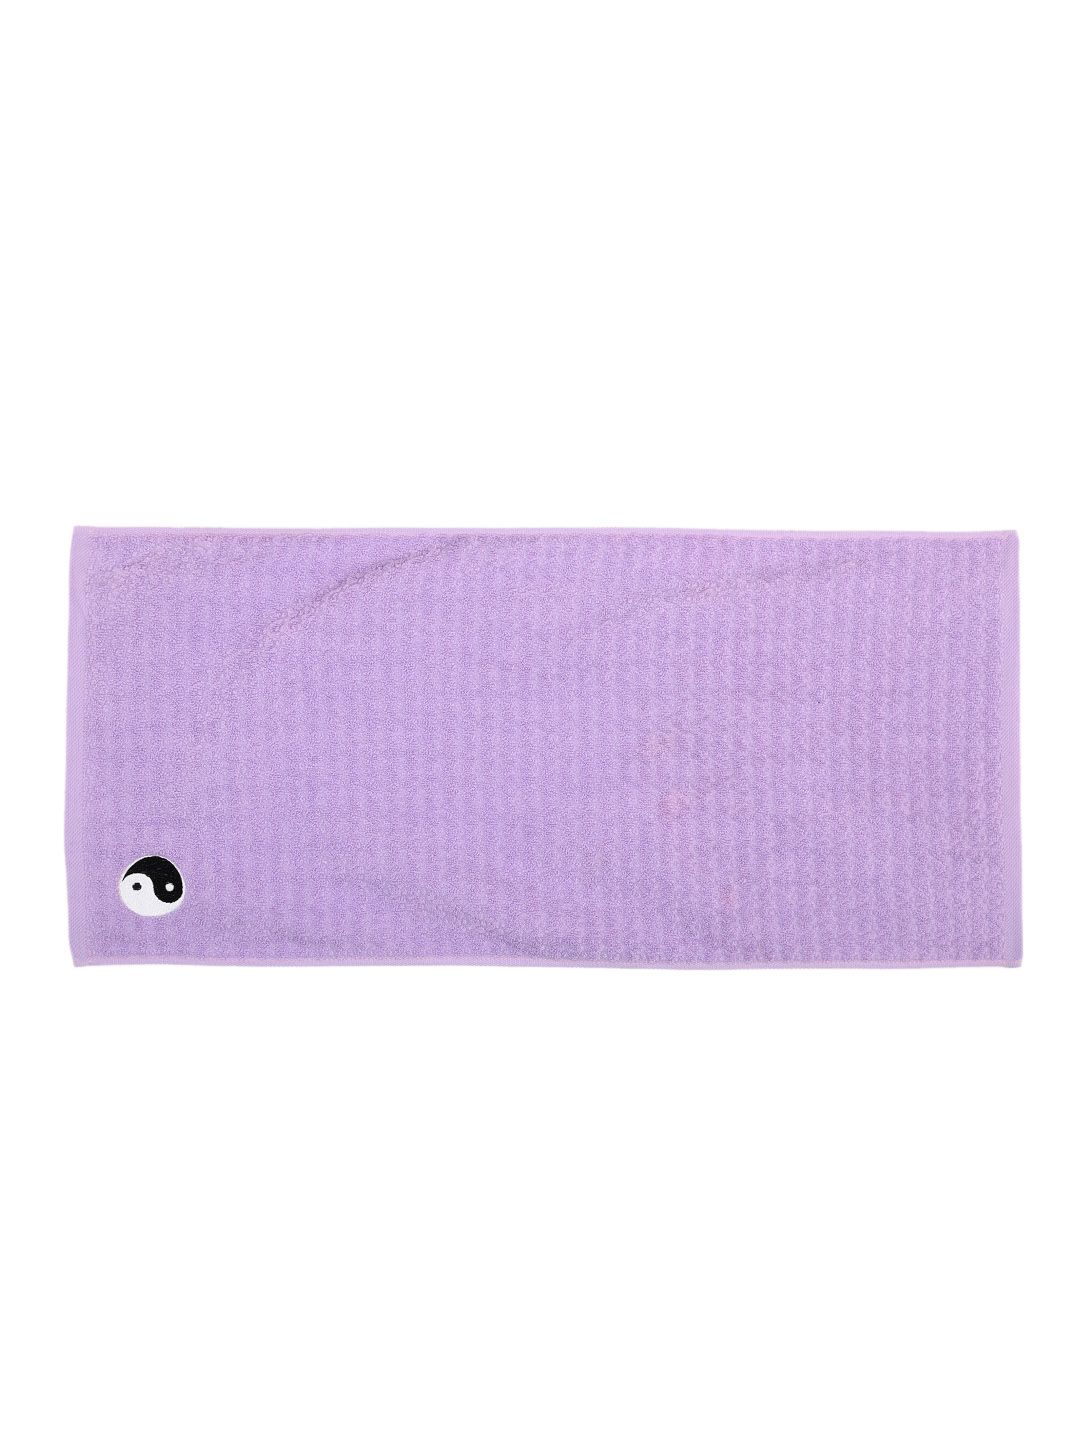 FOREVER 21 Women Purple Solid Pure Cotton Bath Towel Price in India